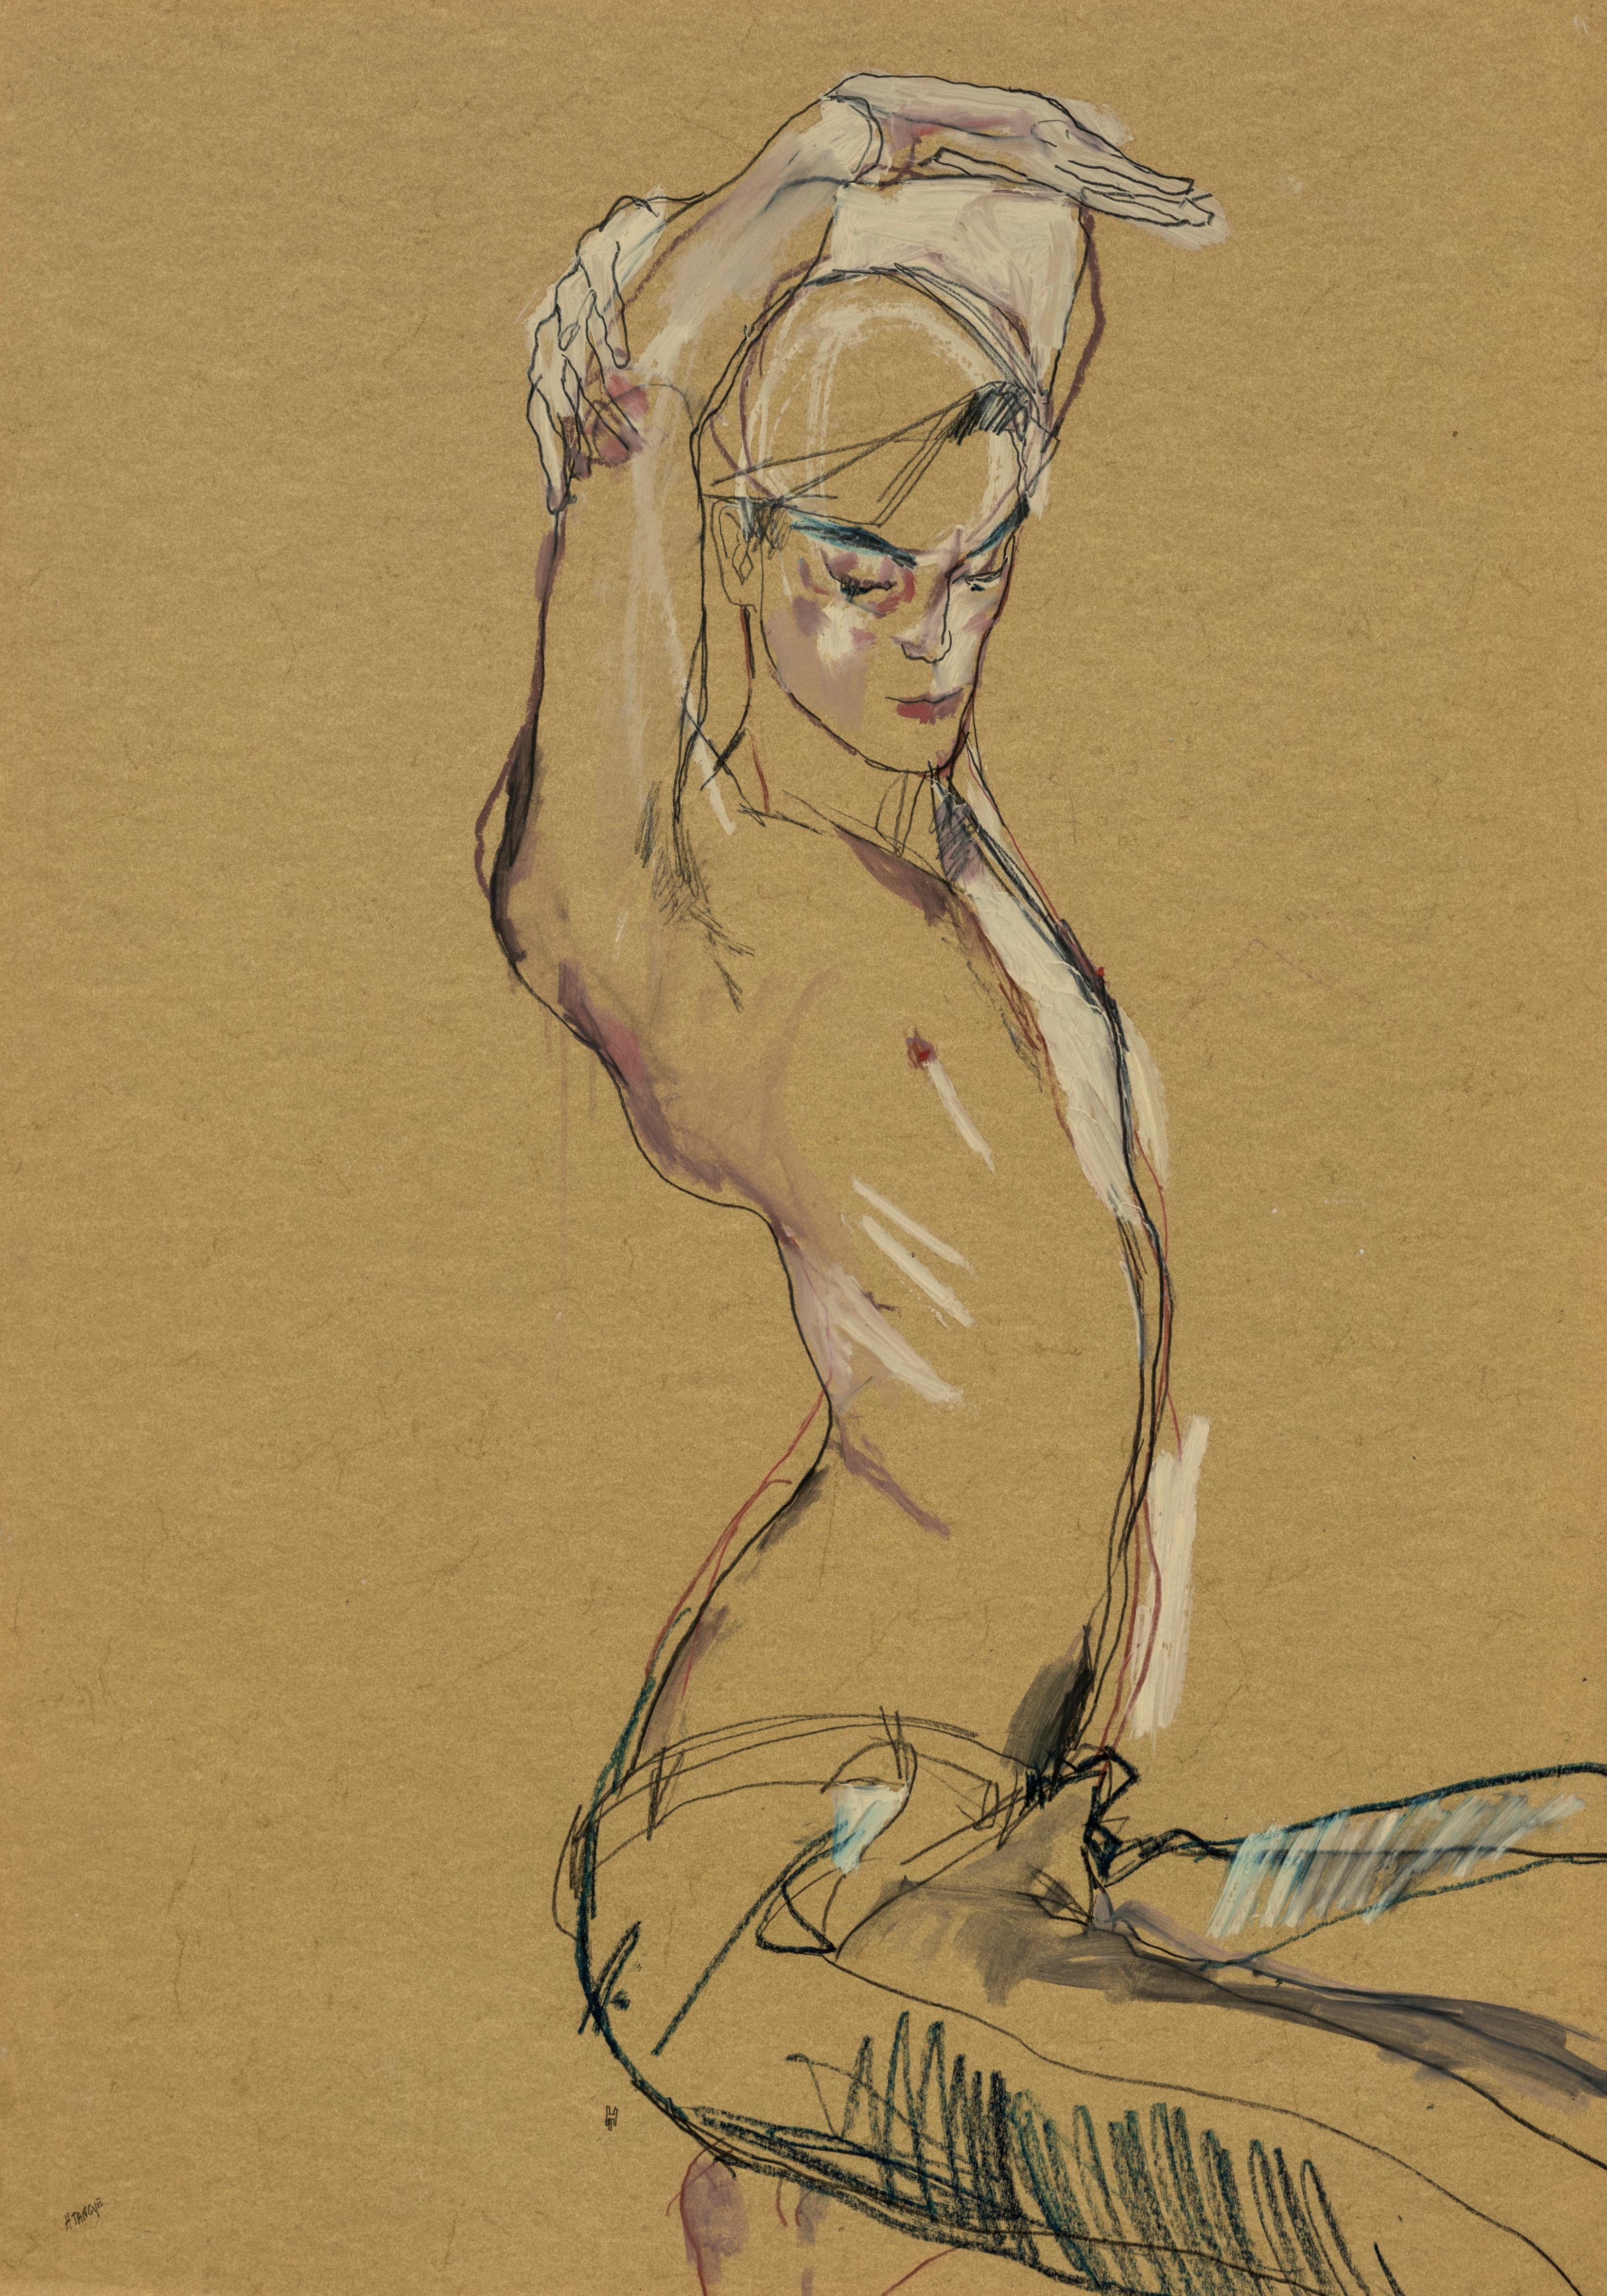 Howard Tangye Figurative Painting - Jake W. (Hands Over Head - Shirtless), Mixed media on ochre parchment